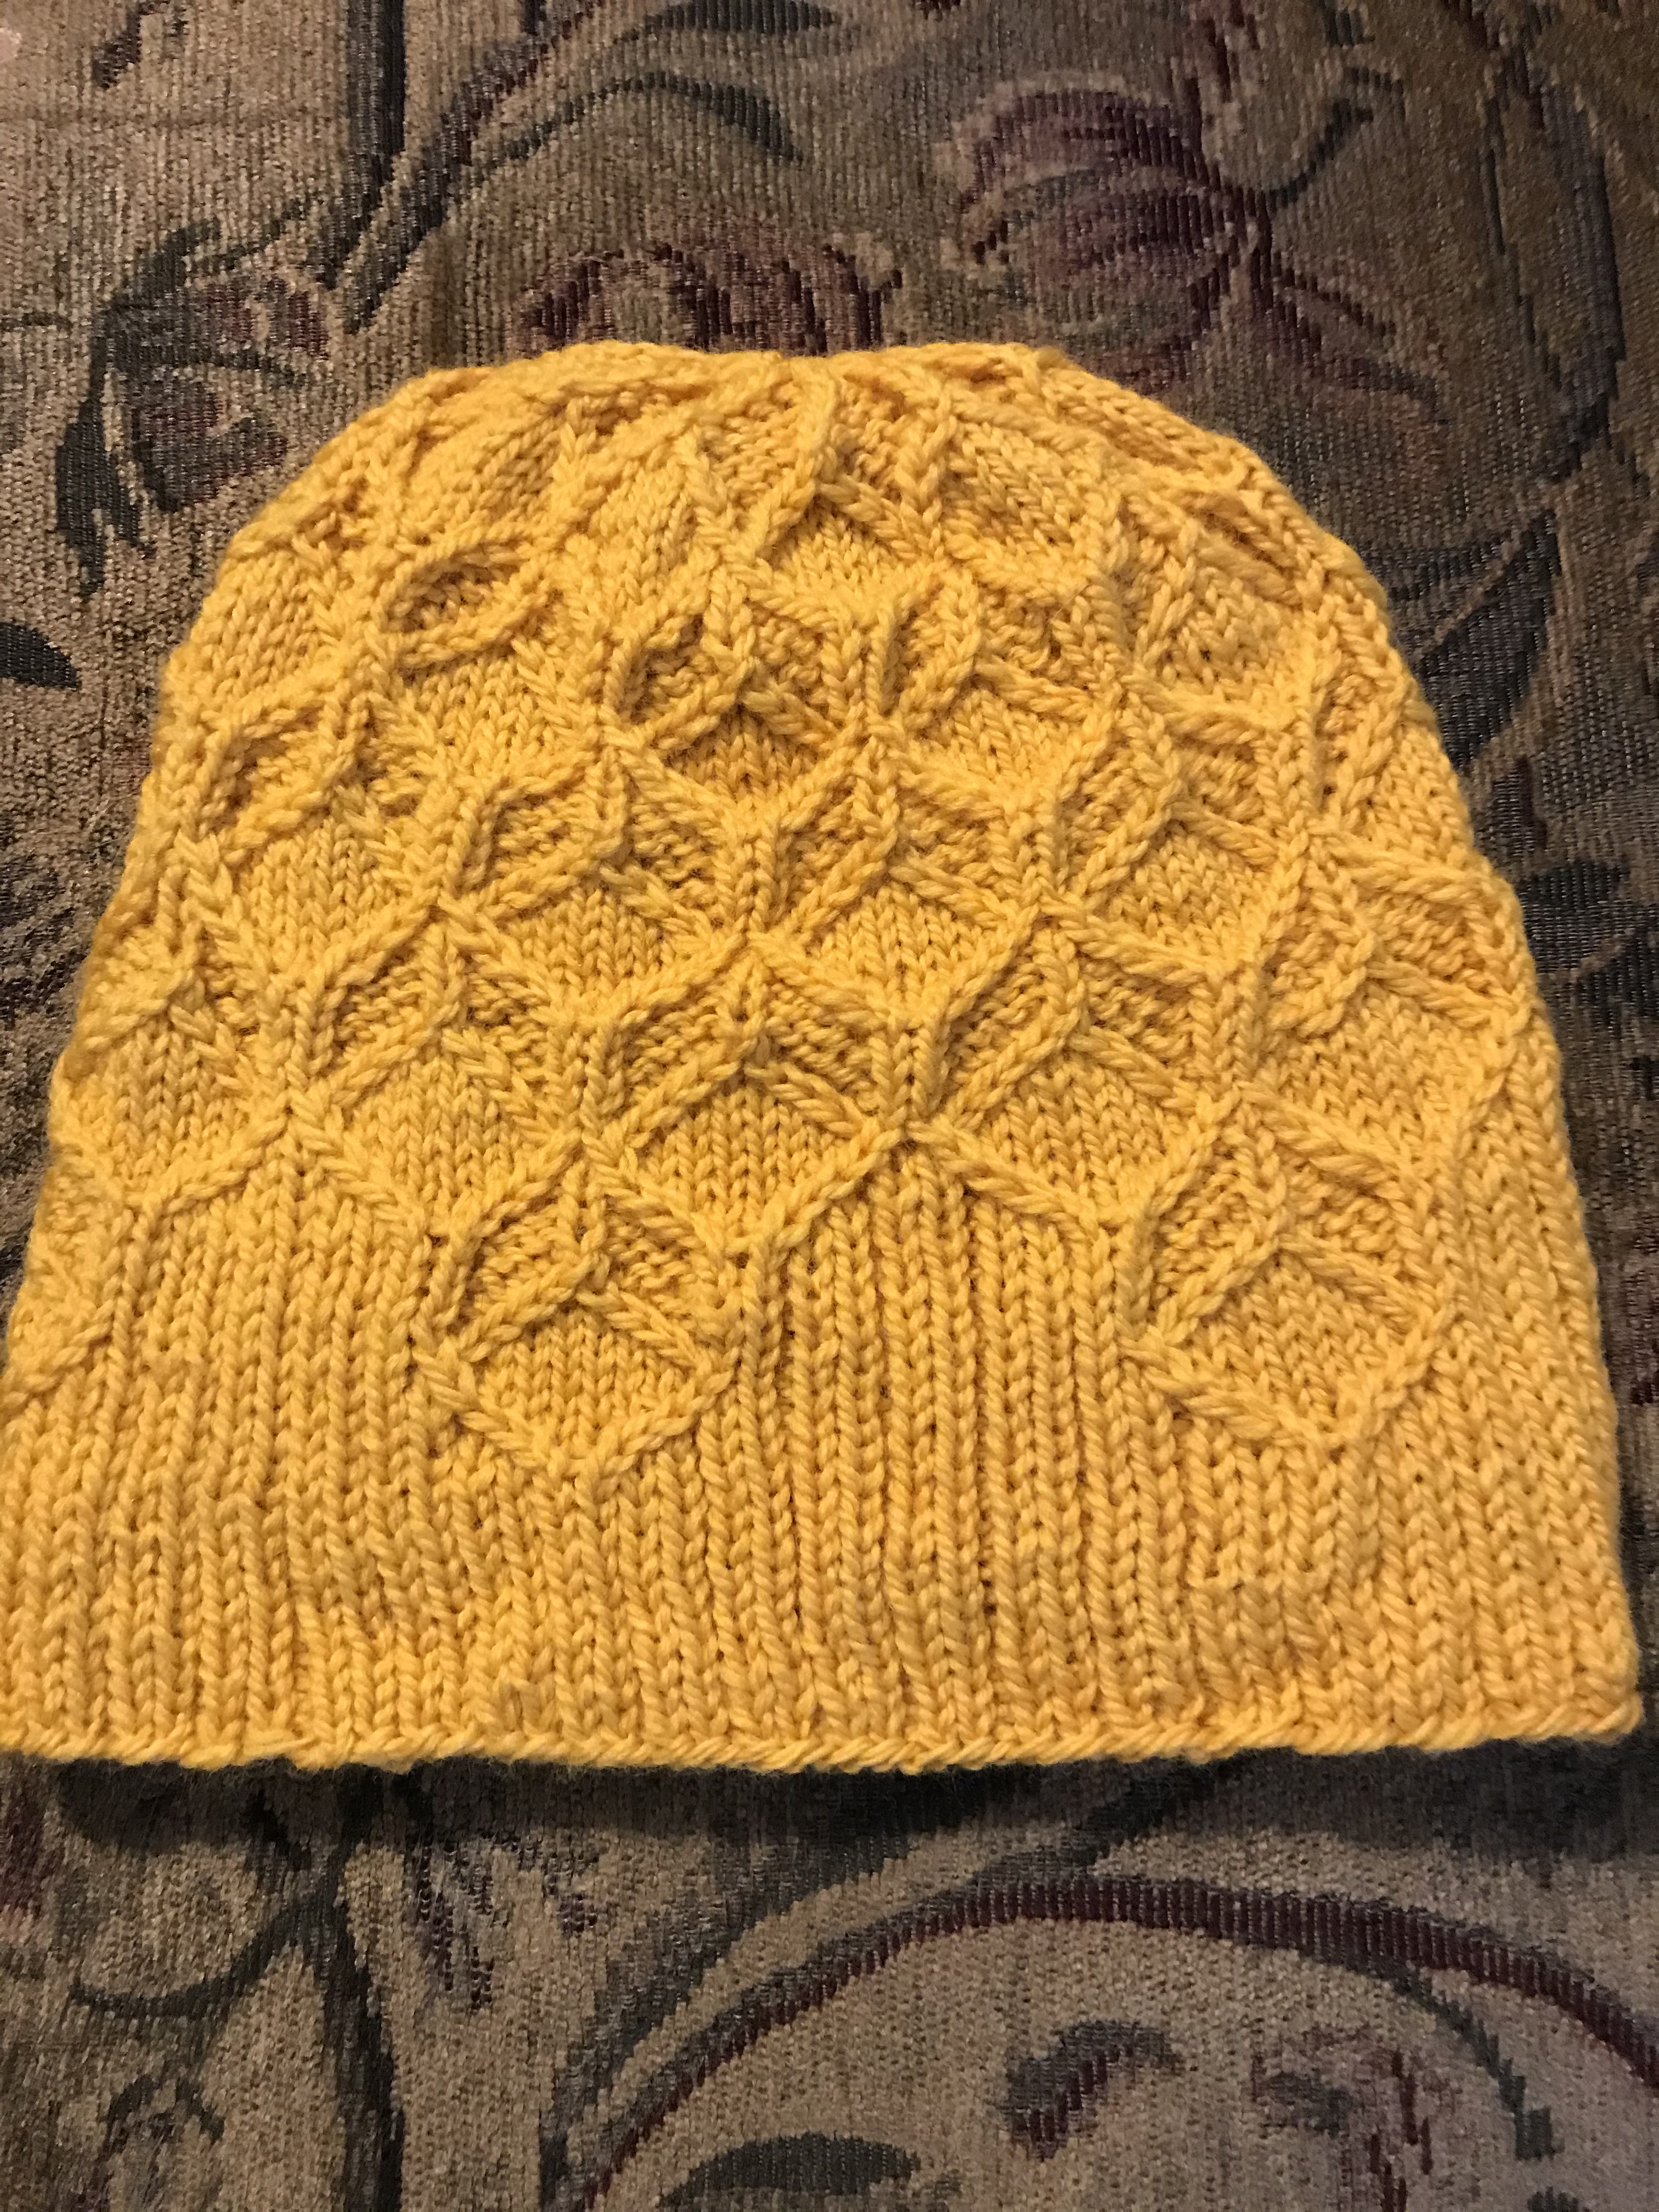 beeswax hat